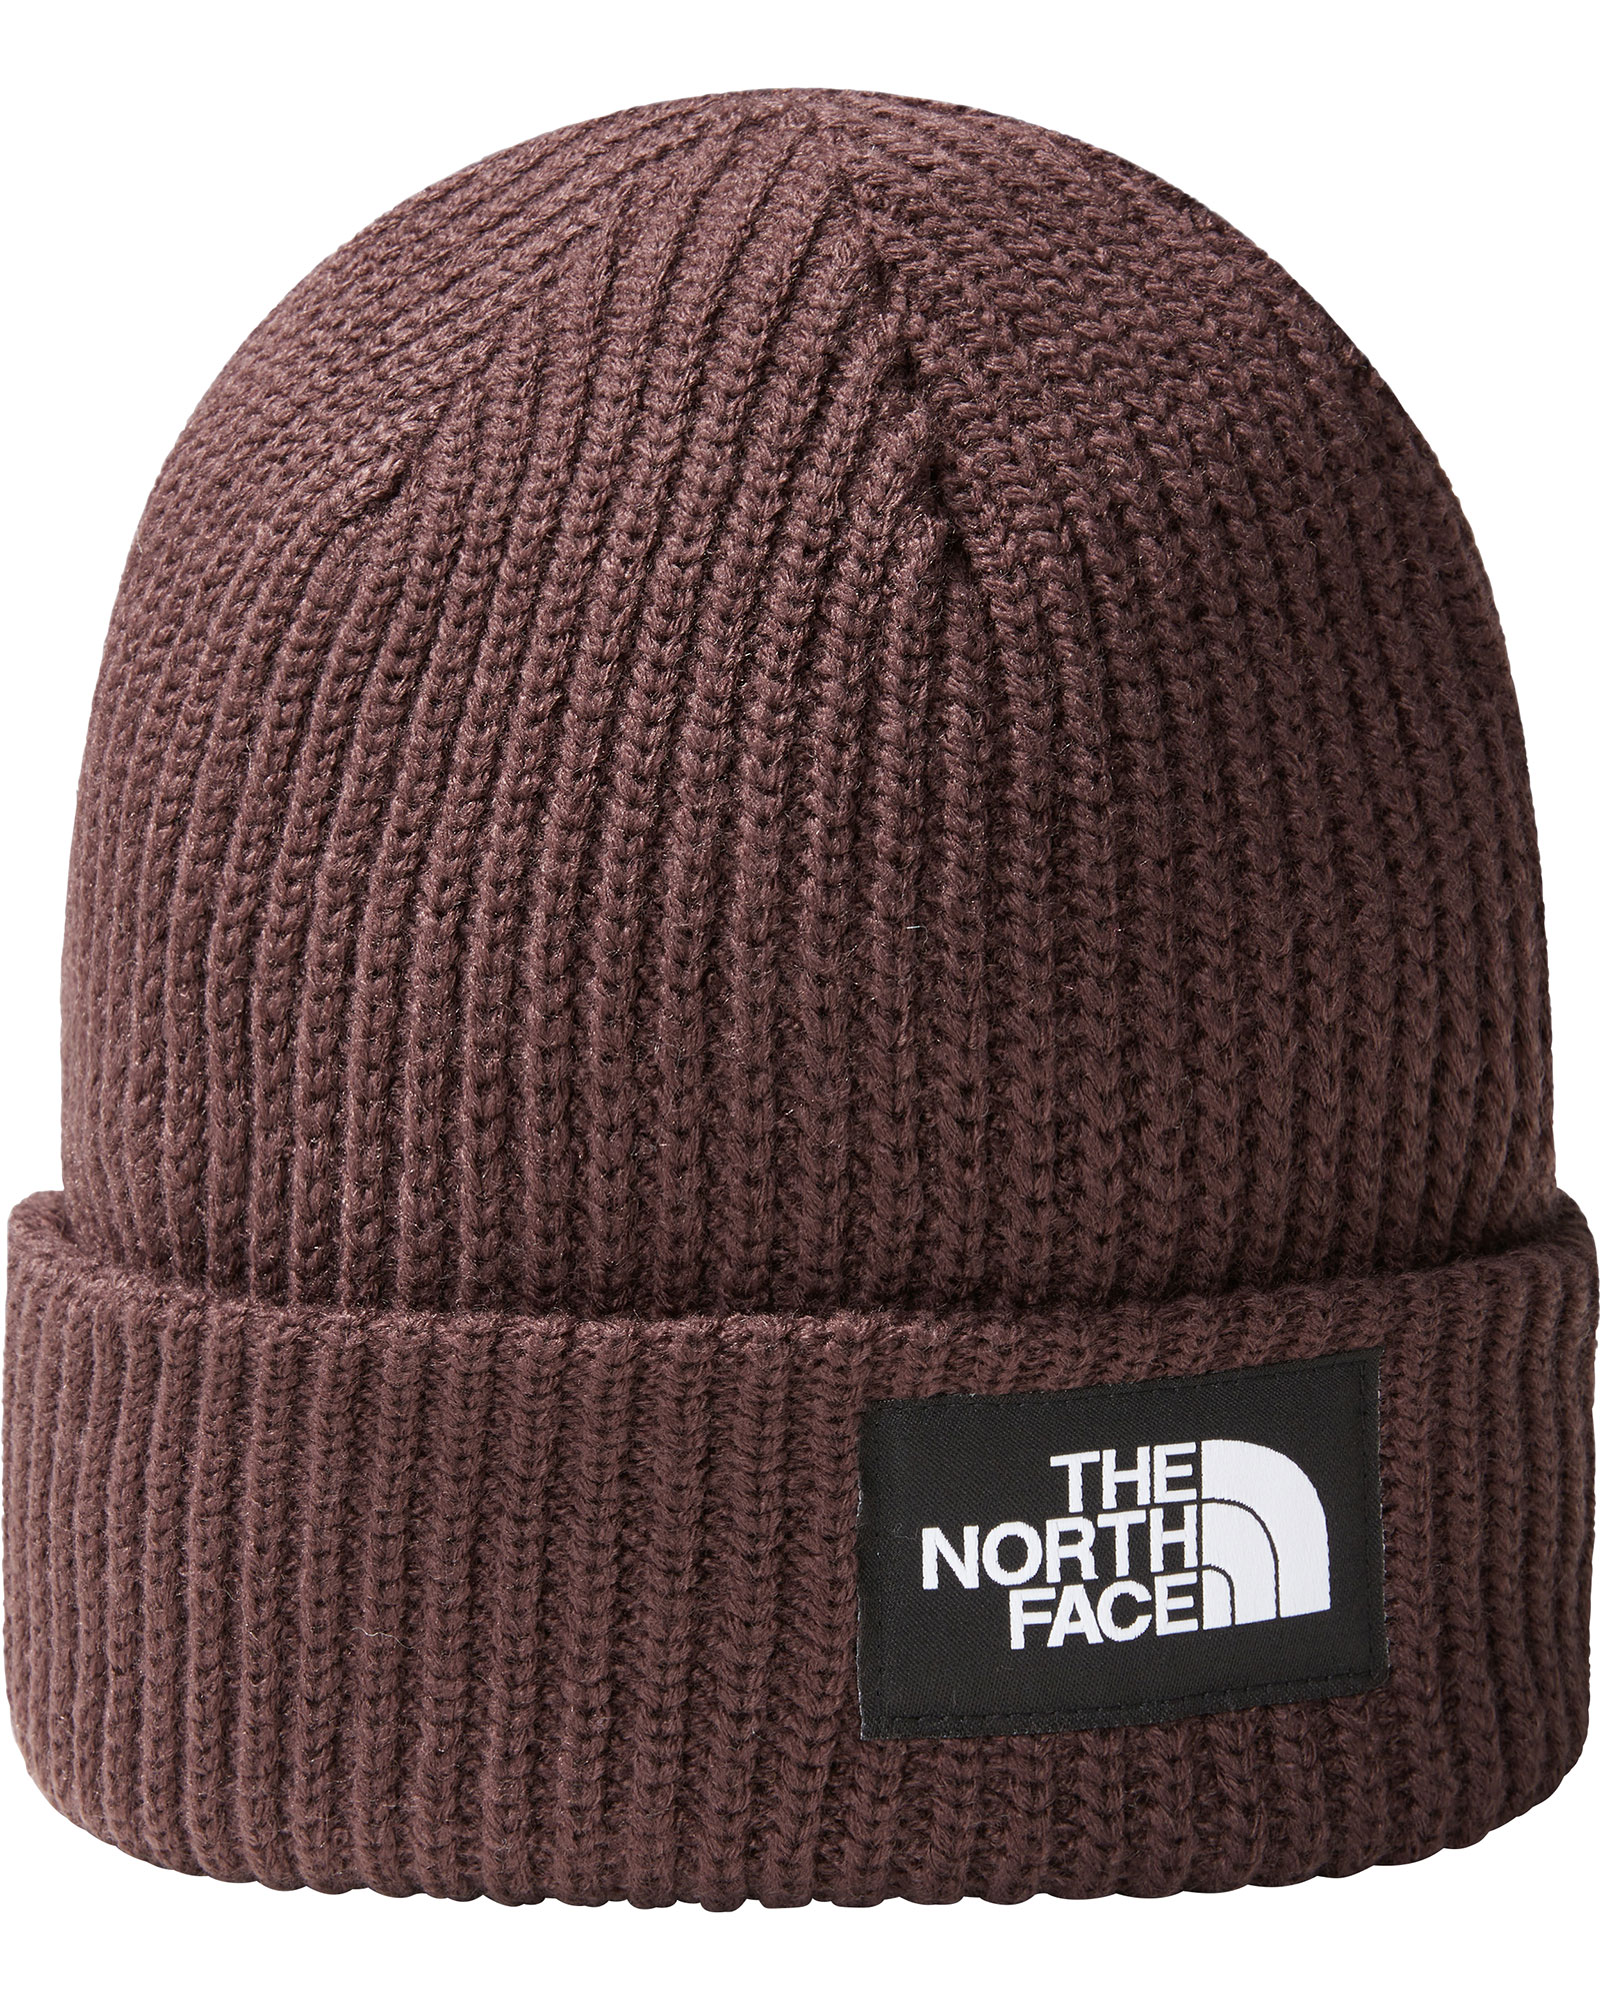 The North Face Salty Lined Beanie - Coal Brown